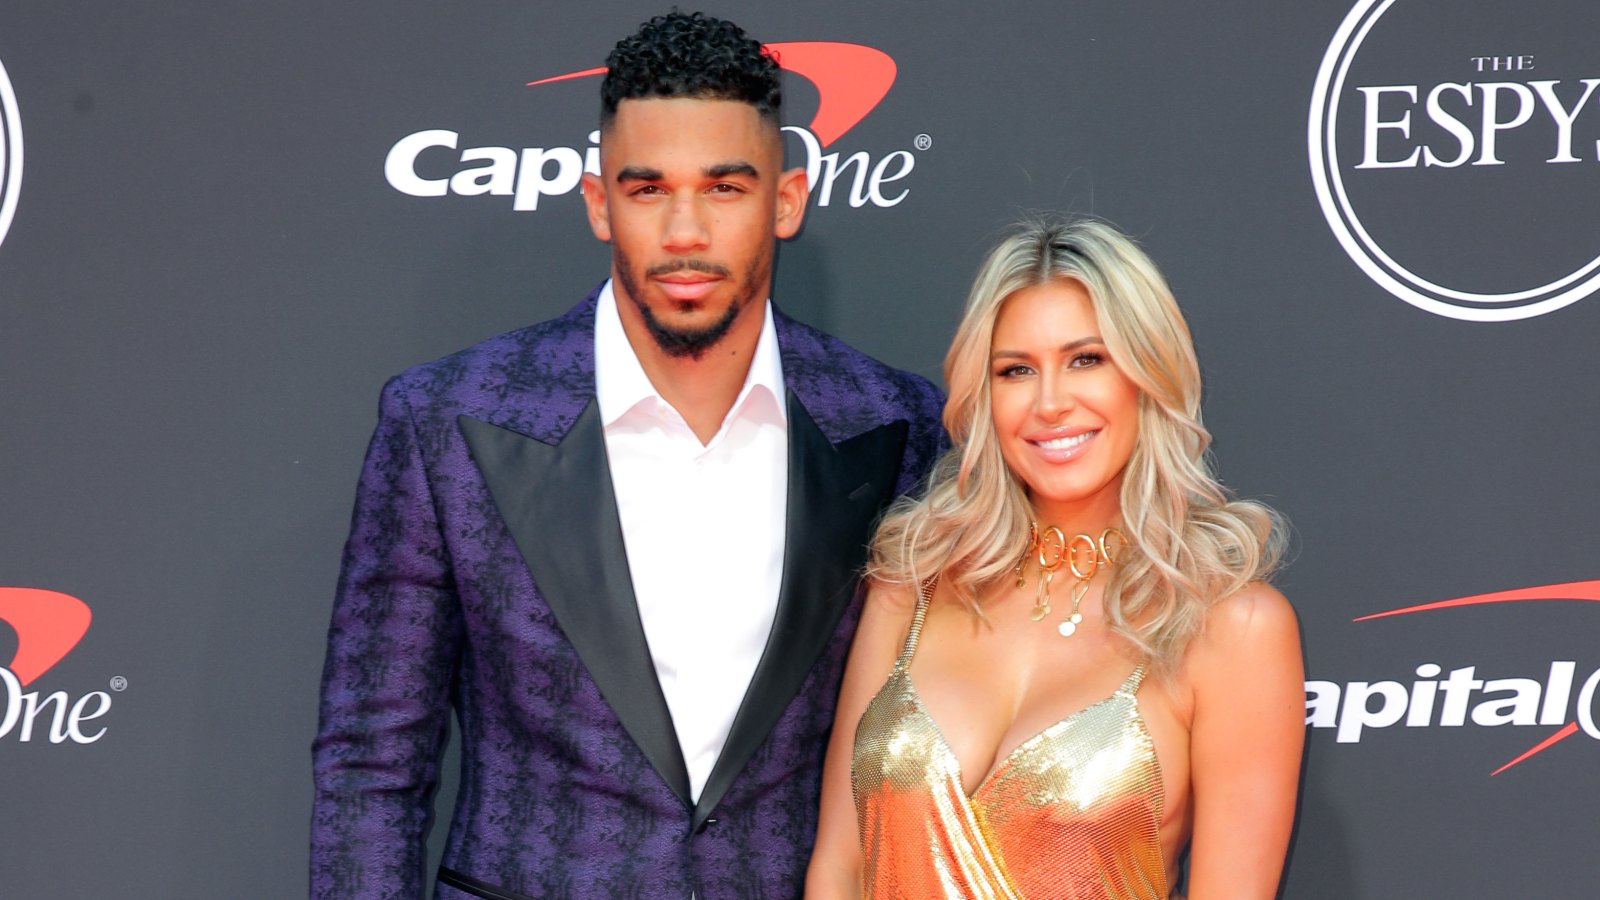 Hockey Player Evander Kane's Pregnant Wife Claims He Bets on His NHL Games